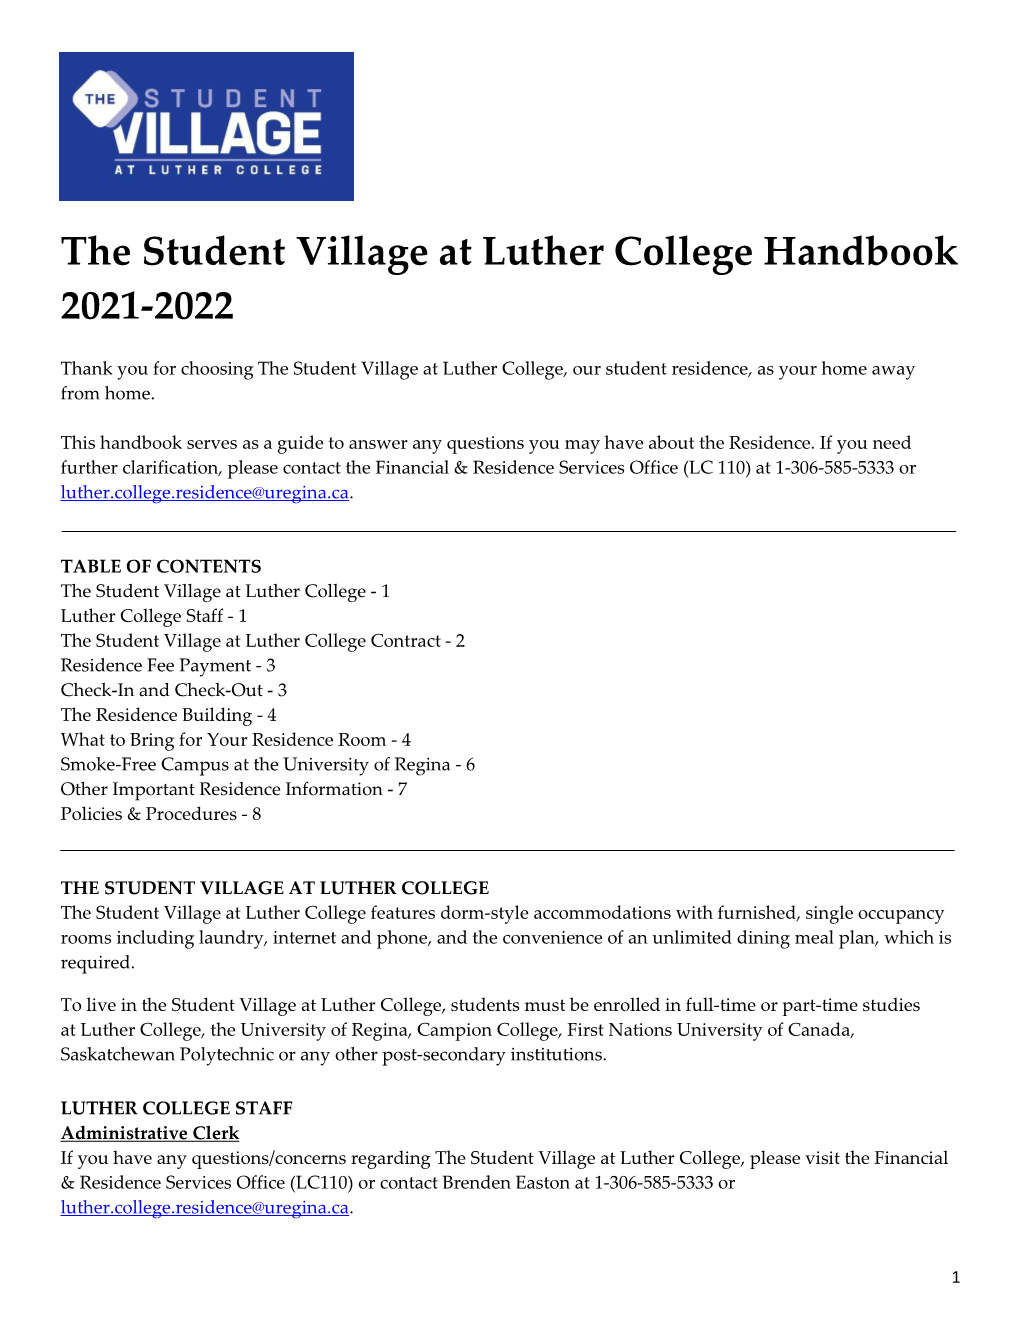 The Student Village at Luther College Handbook 2021-2022